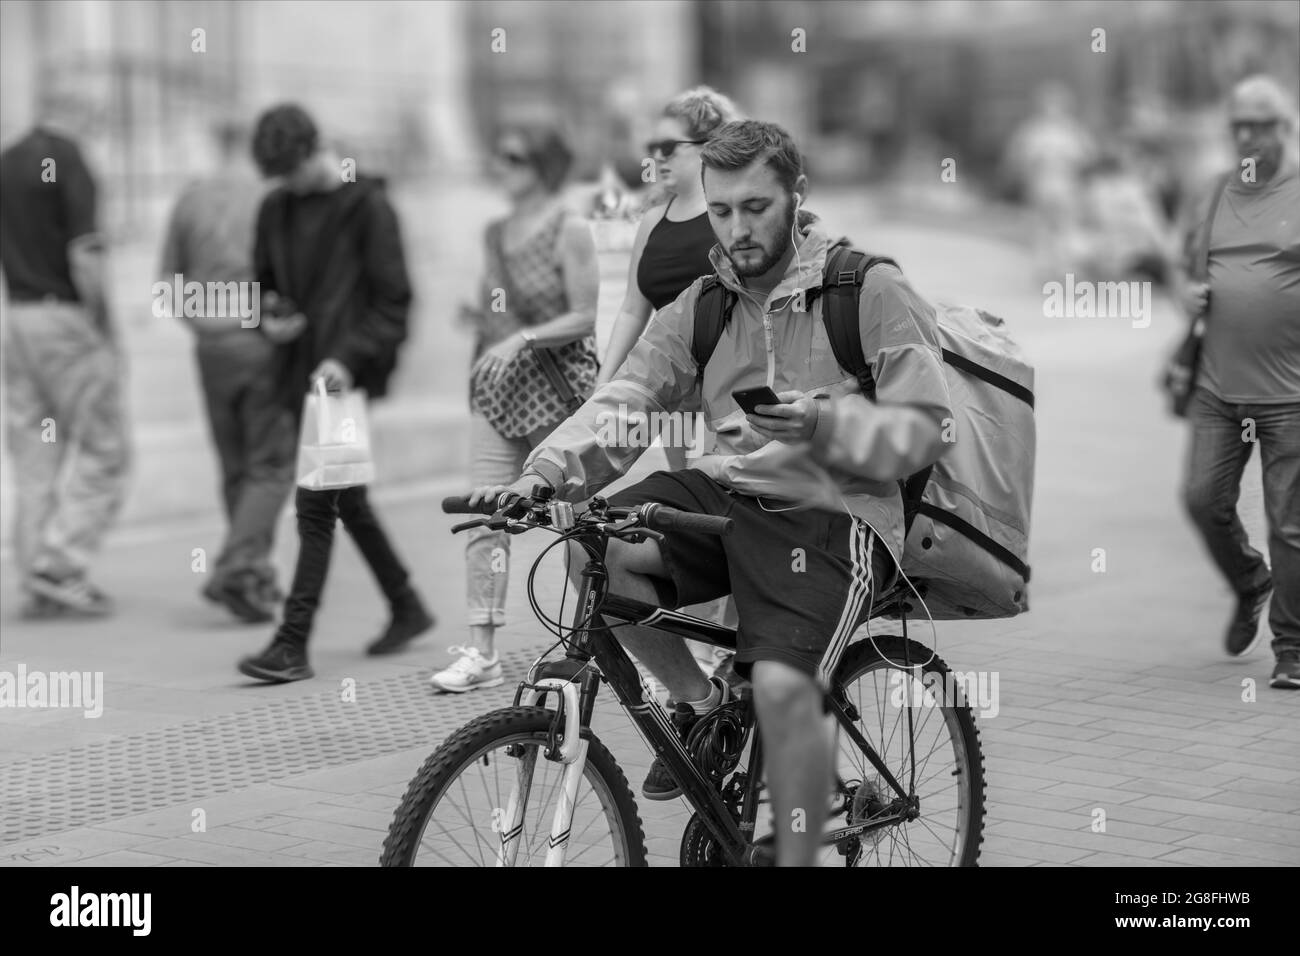 Pizza guy on a bike, carrying a backpack and using a cell phone as he cycles down a city street in York, North Yorkshire, England, UK. Stock Photo